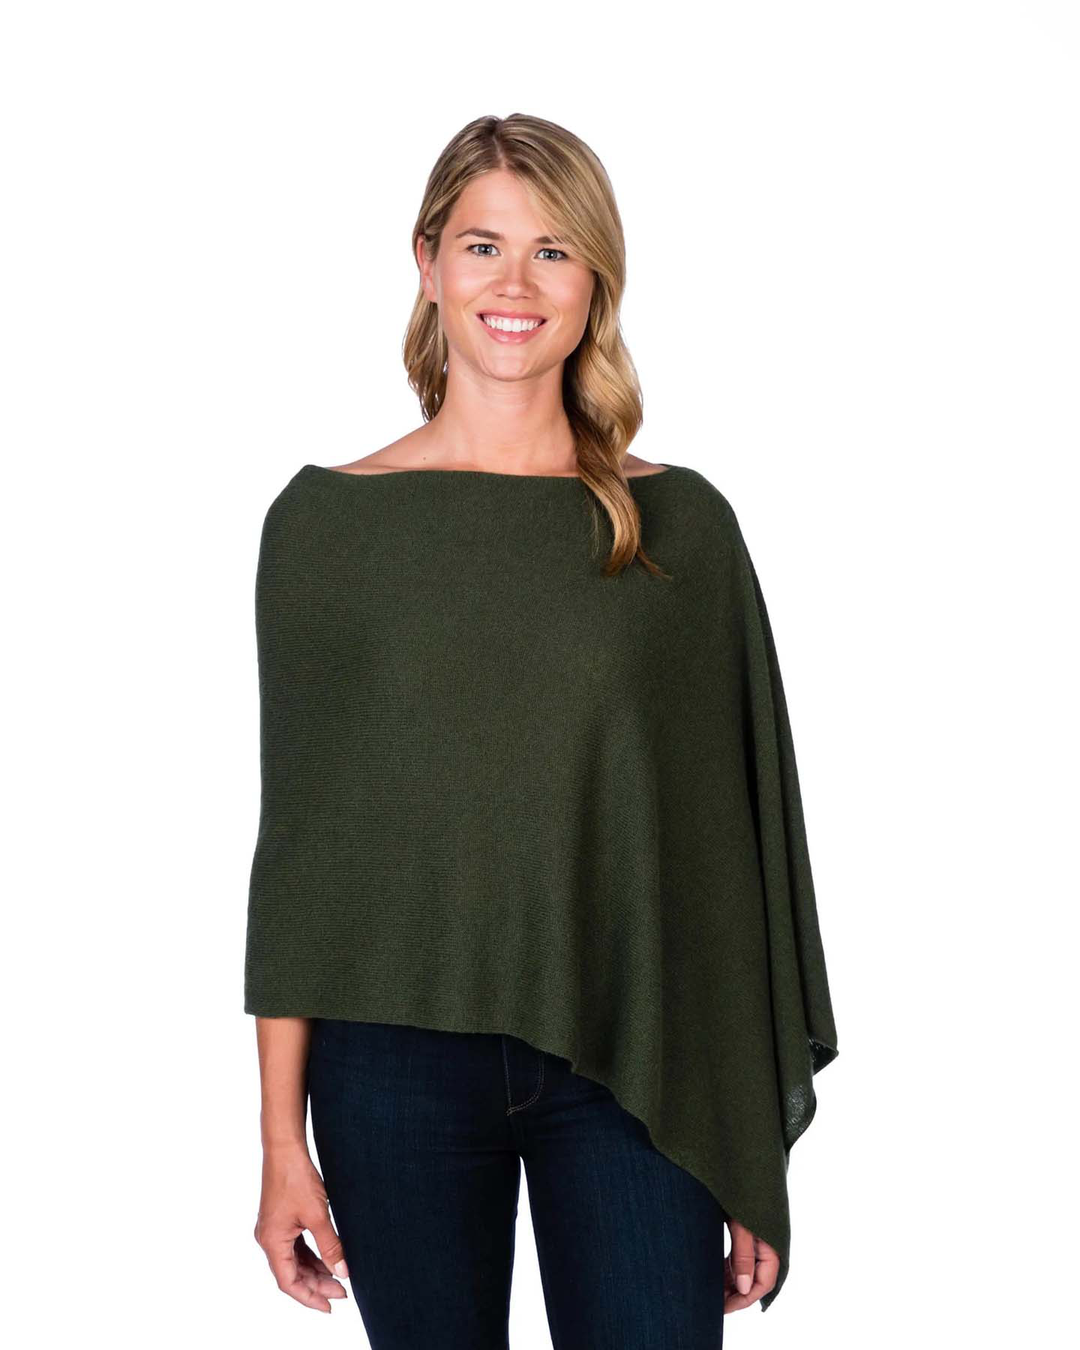 Cashmere Dress Toppers